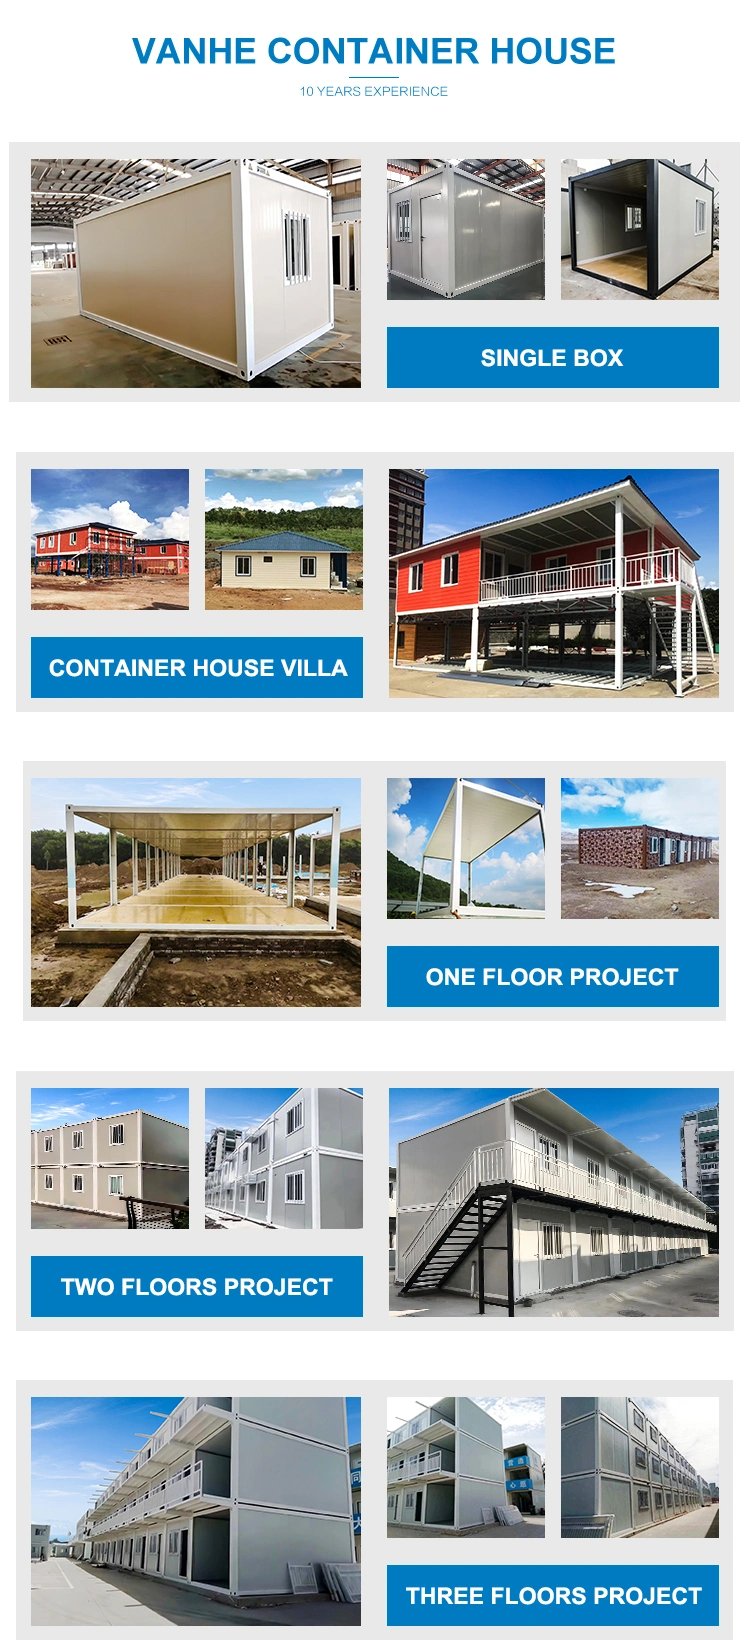 China Modern Modular Wall Sandwich Panel Material Cabin Designs Portable Home Prefab Container Dormistory Houses